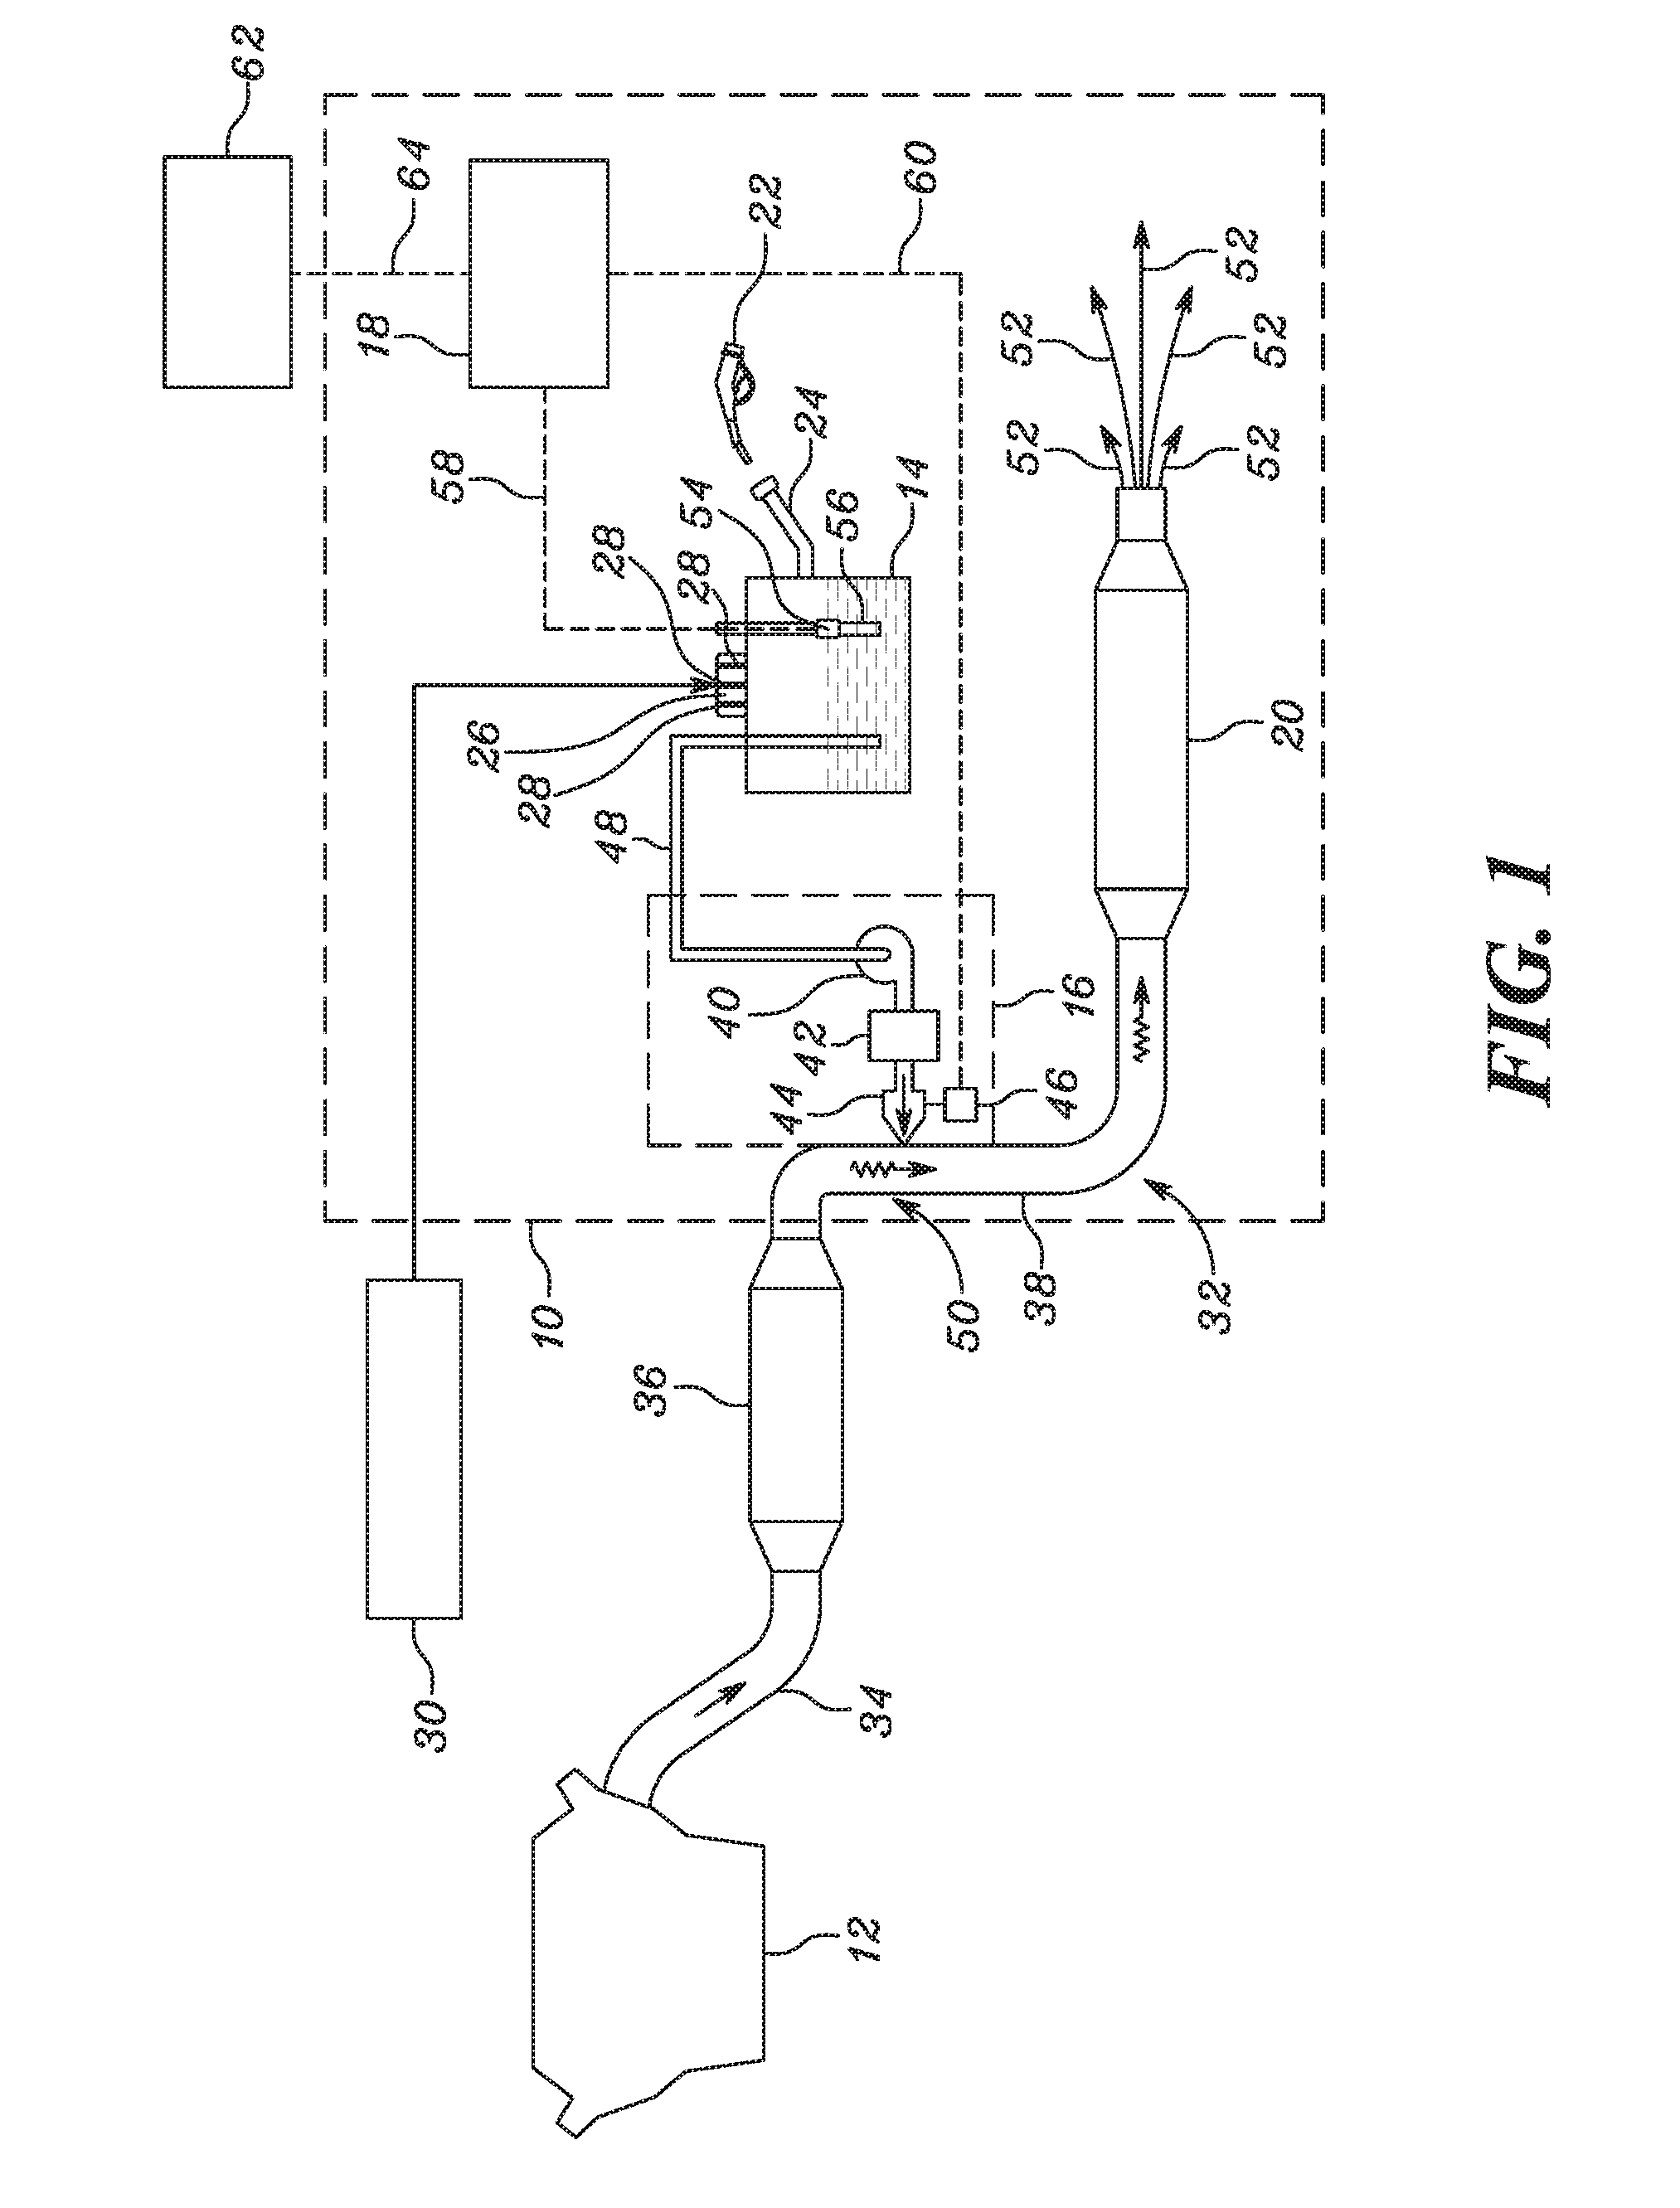 Method and system for detecting malfunctioning of fluid tank of machine